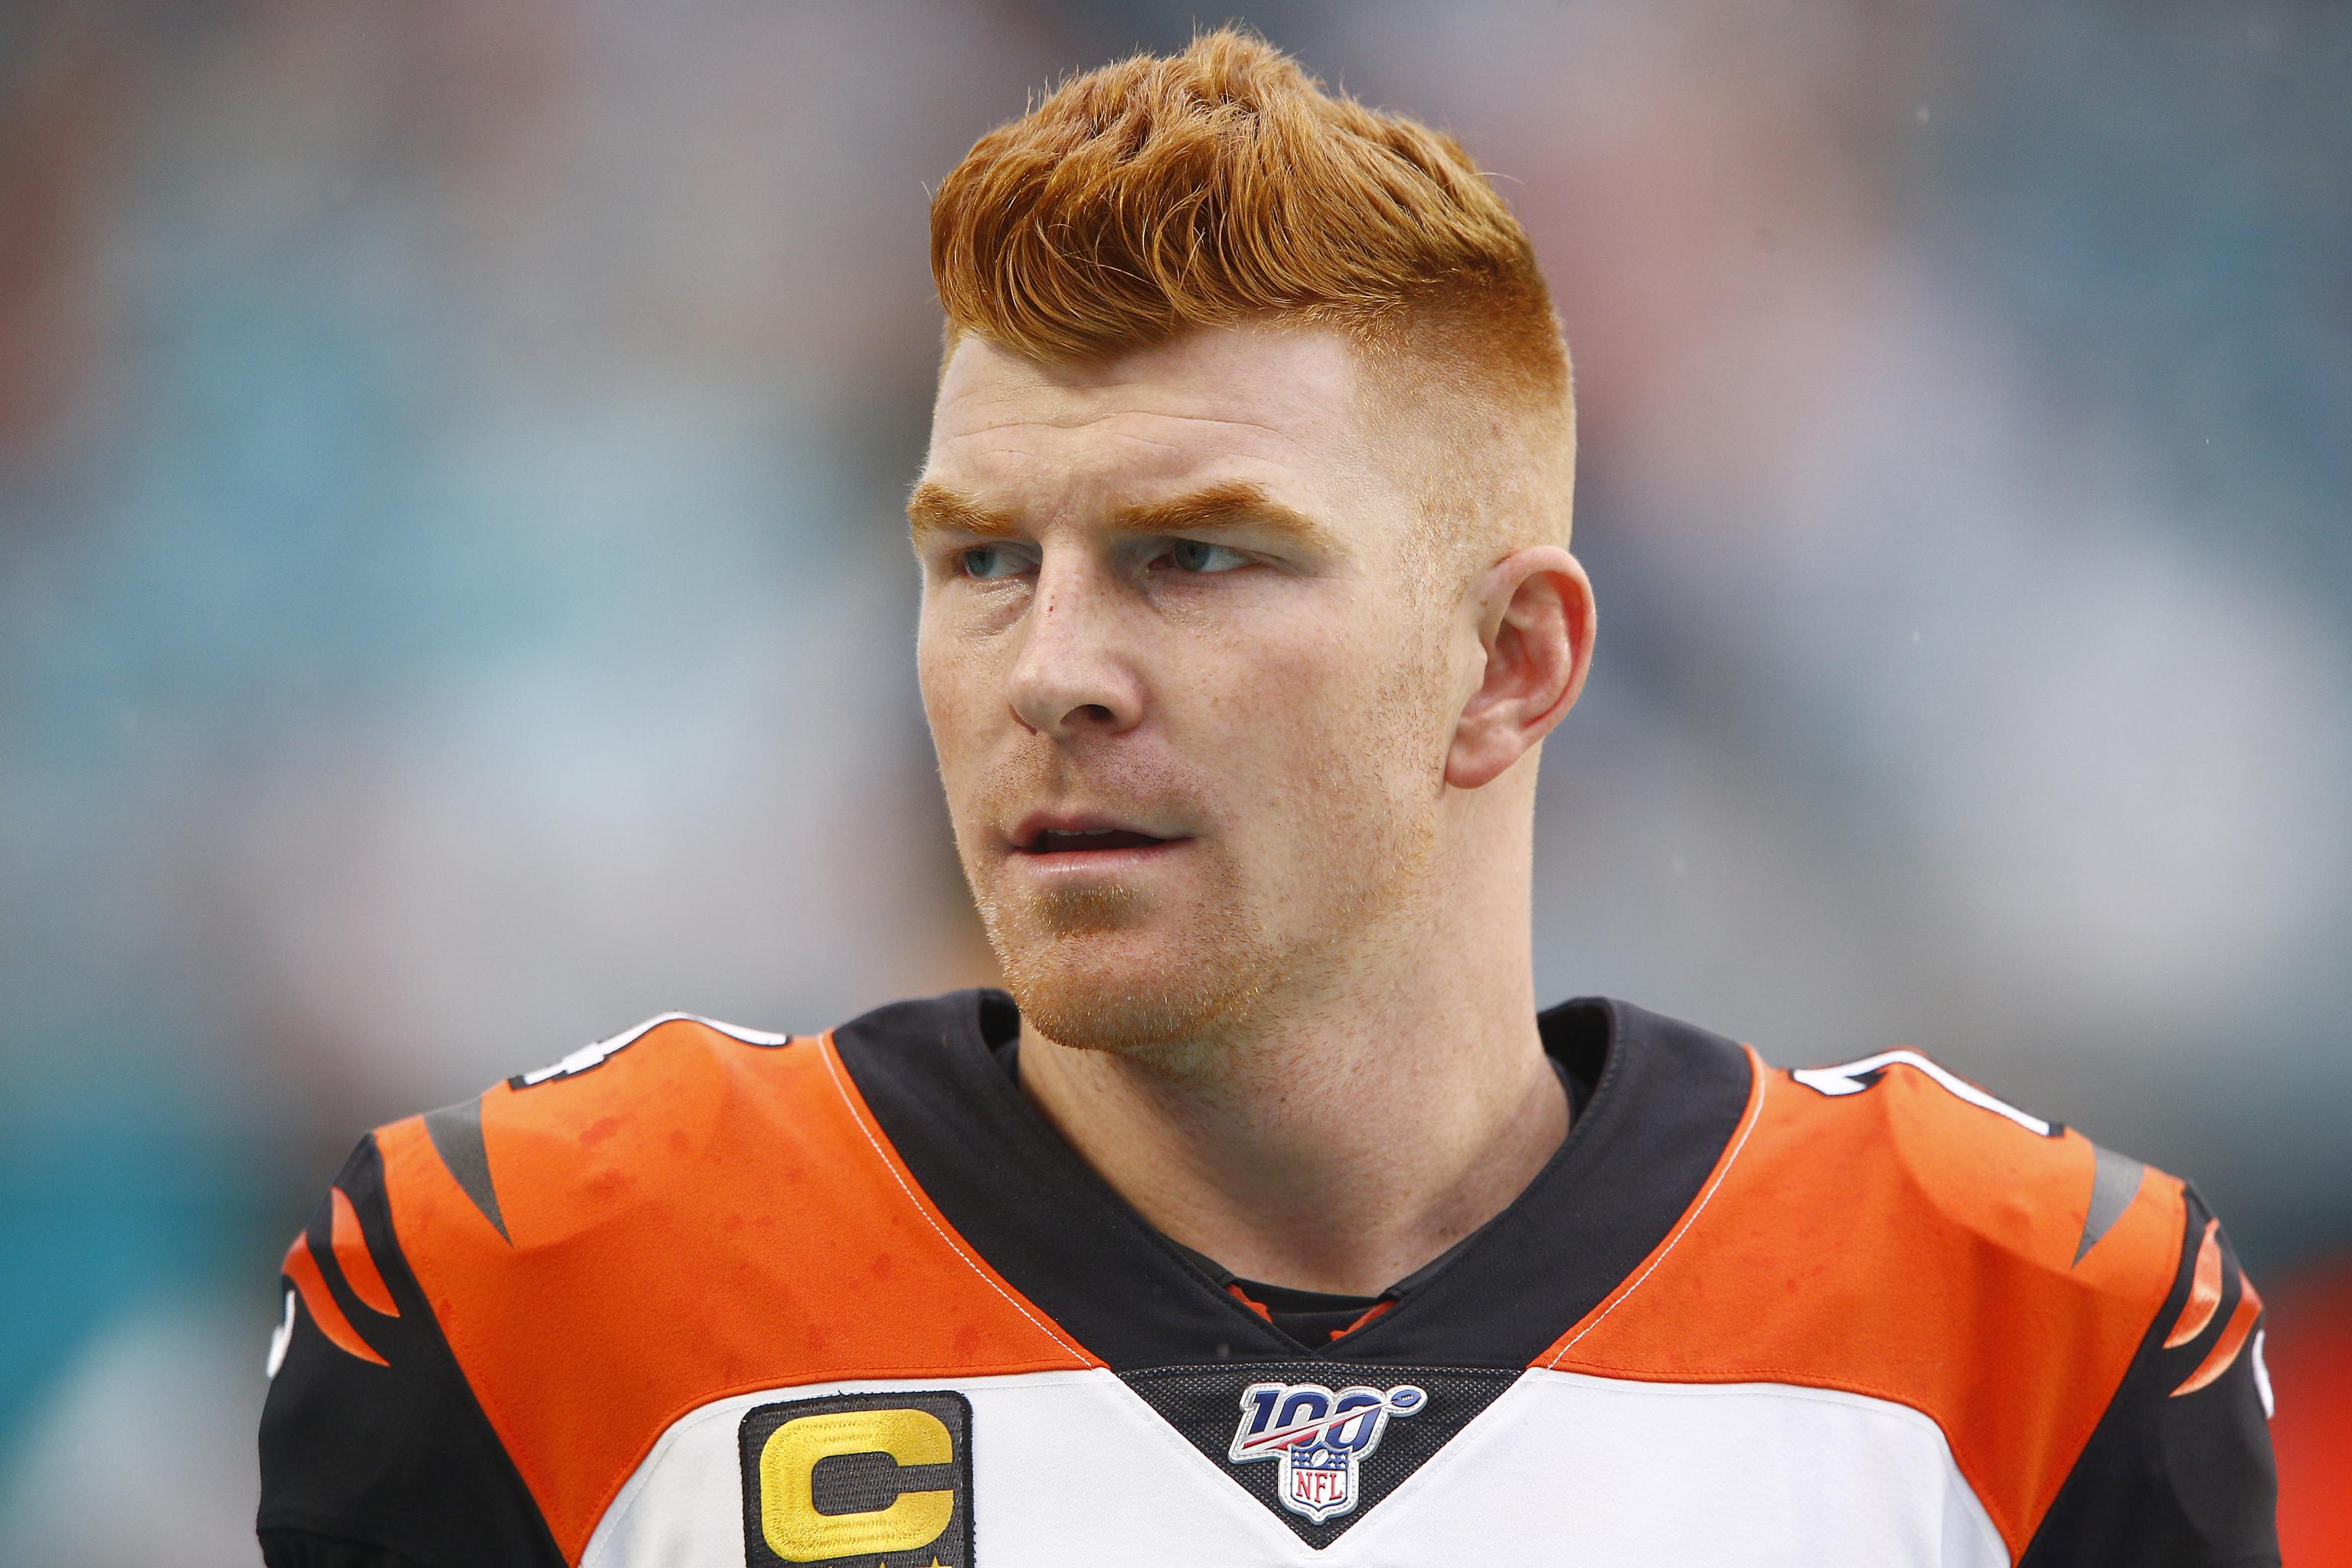 Bengals benching Andy Dalton for Ryan Finley after bye